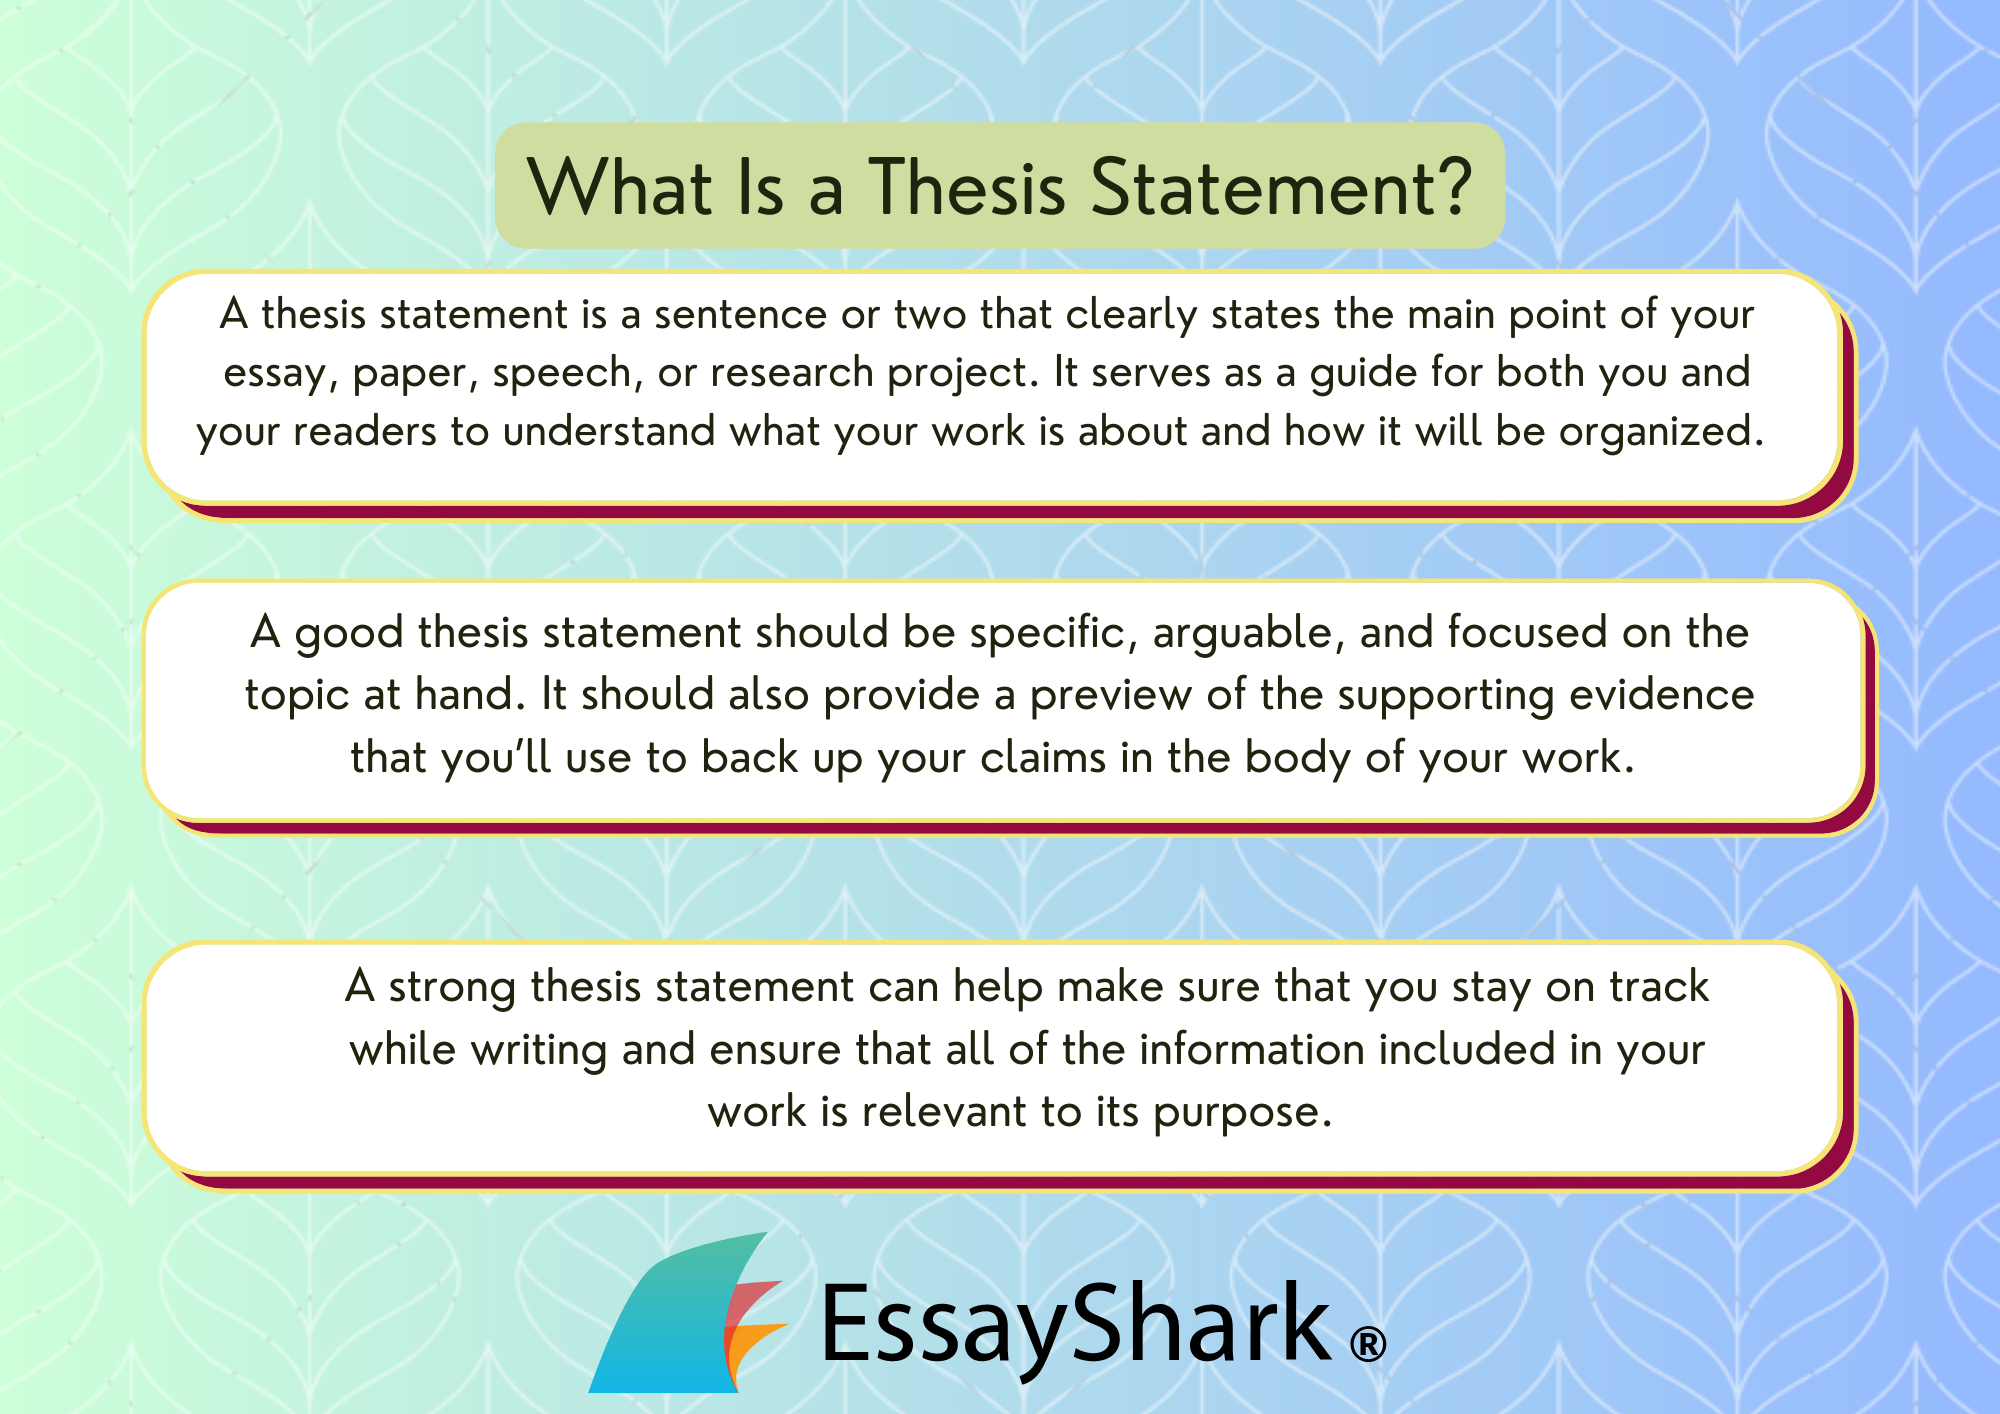 What Is a Thesis Statement